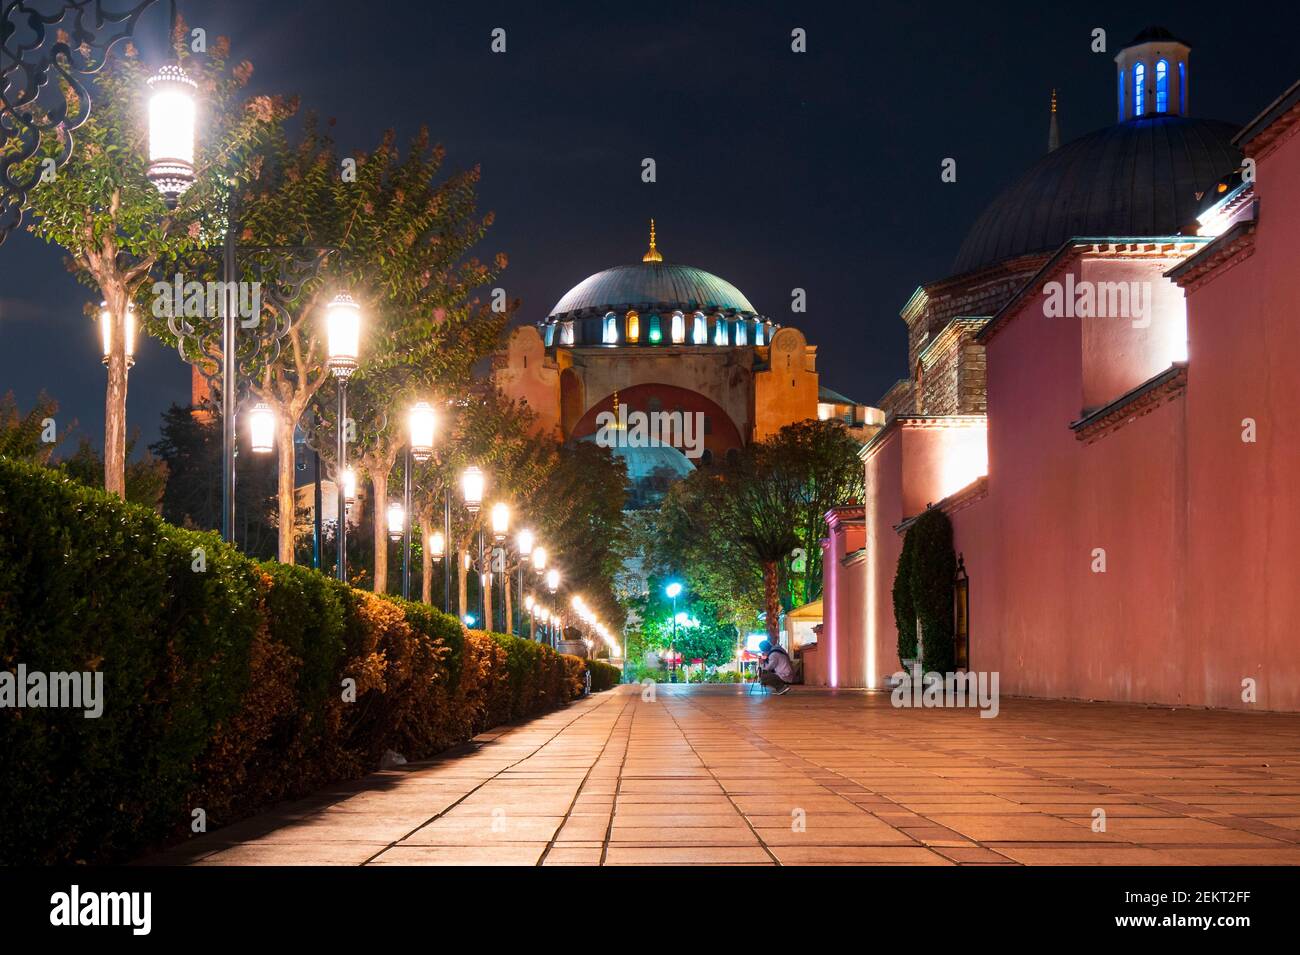 The ancient Hagia Sophia, once a cathedral and an Ottoman mosque and now a museum, illuminated at night in Sultanahmet Square in Istanbul Turkey. Stock Photo